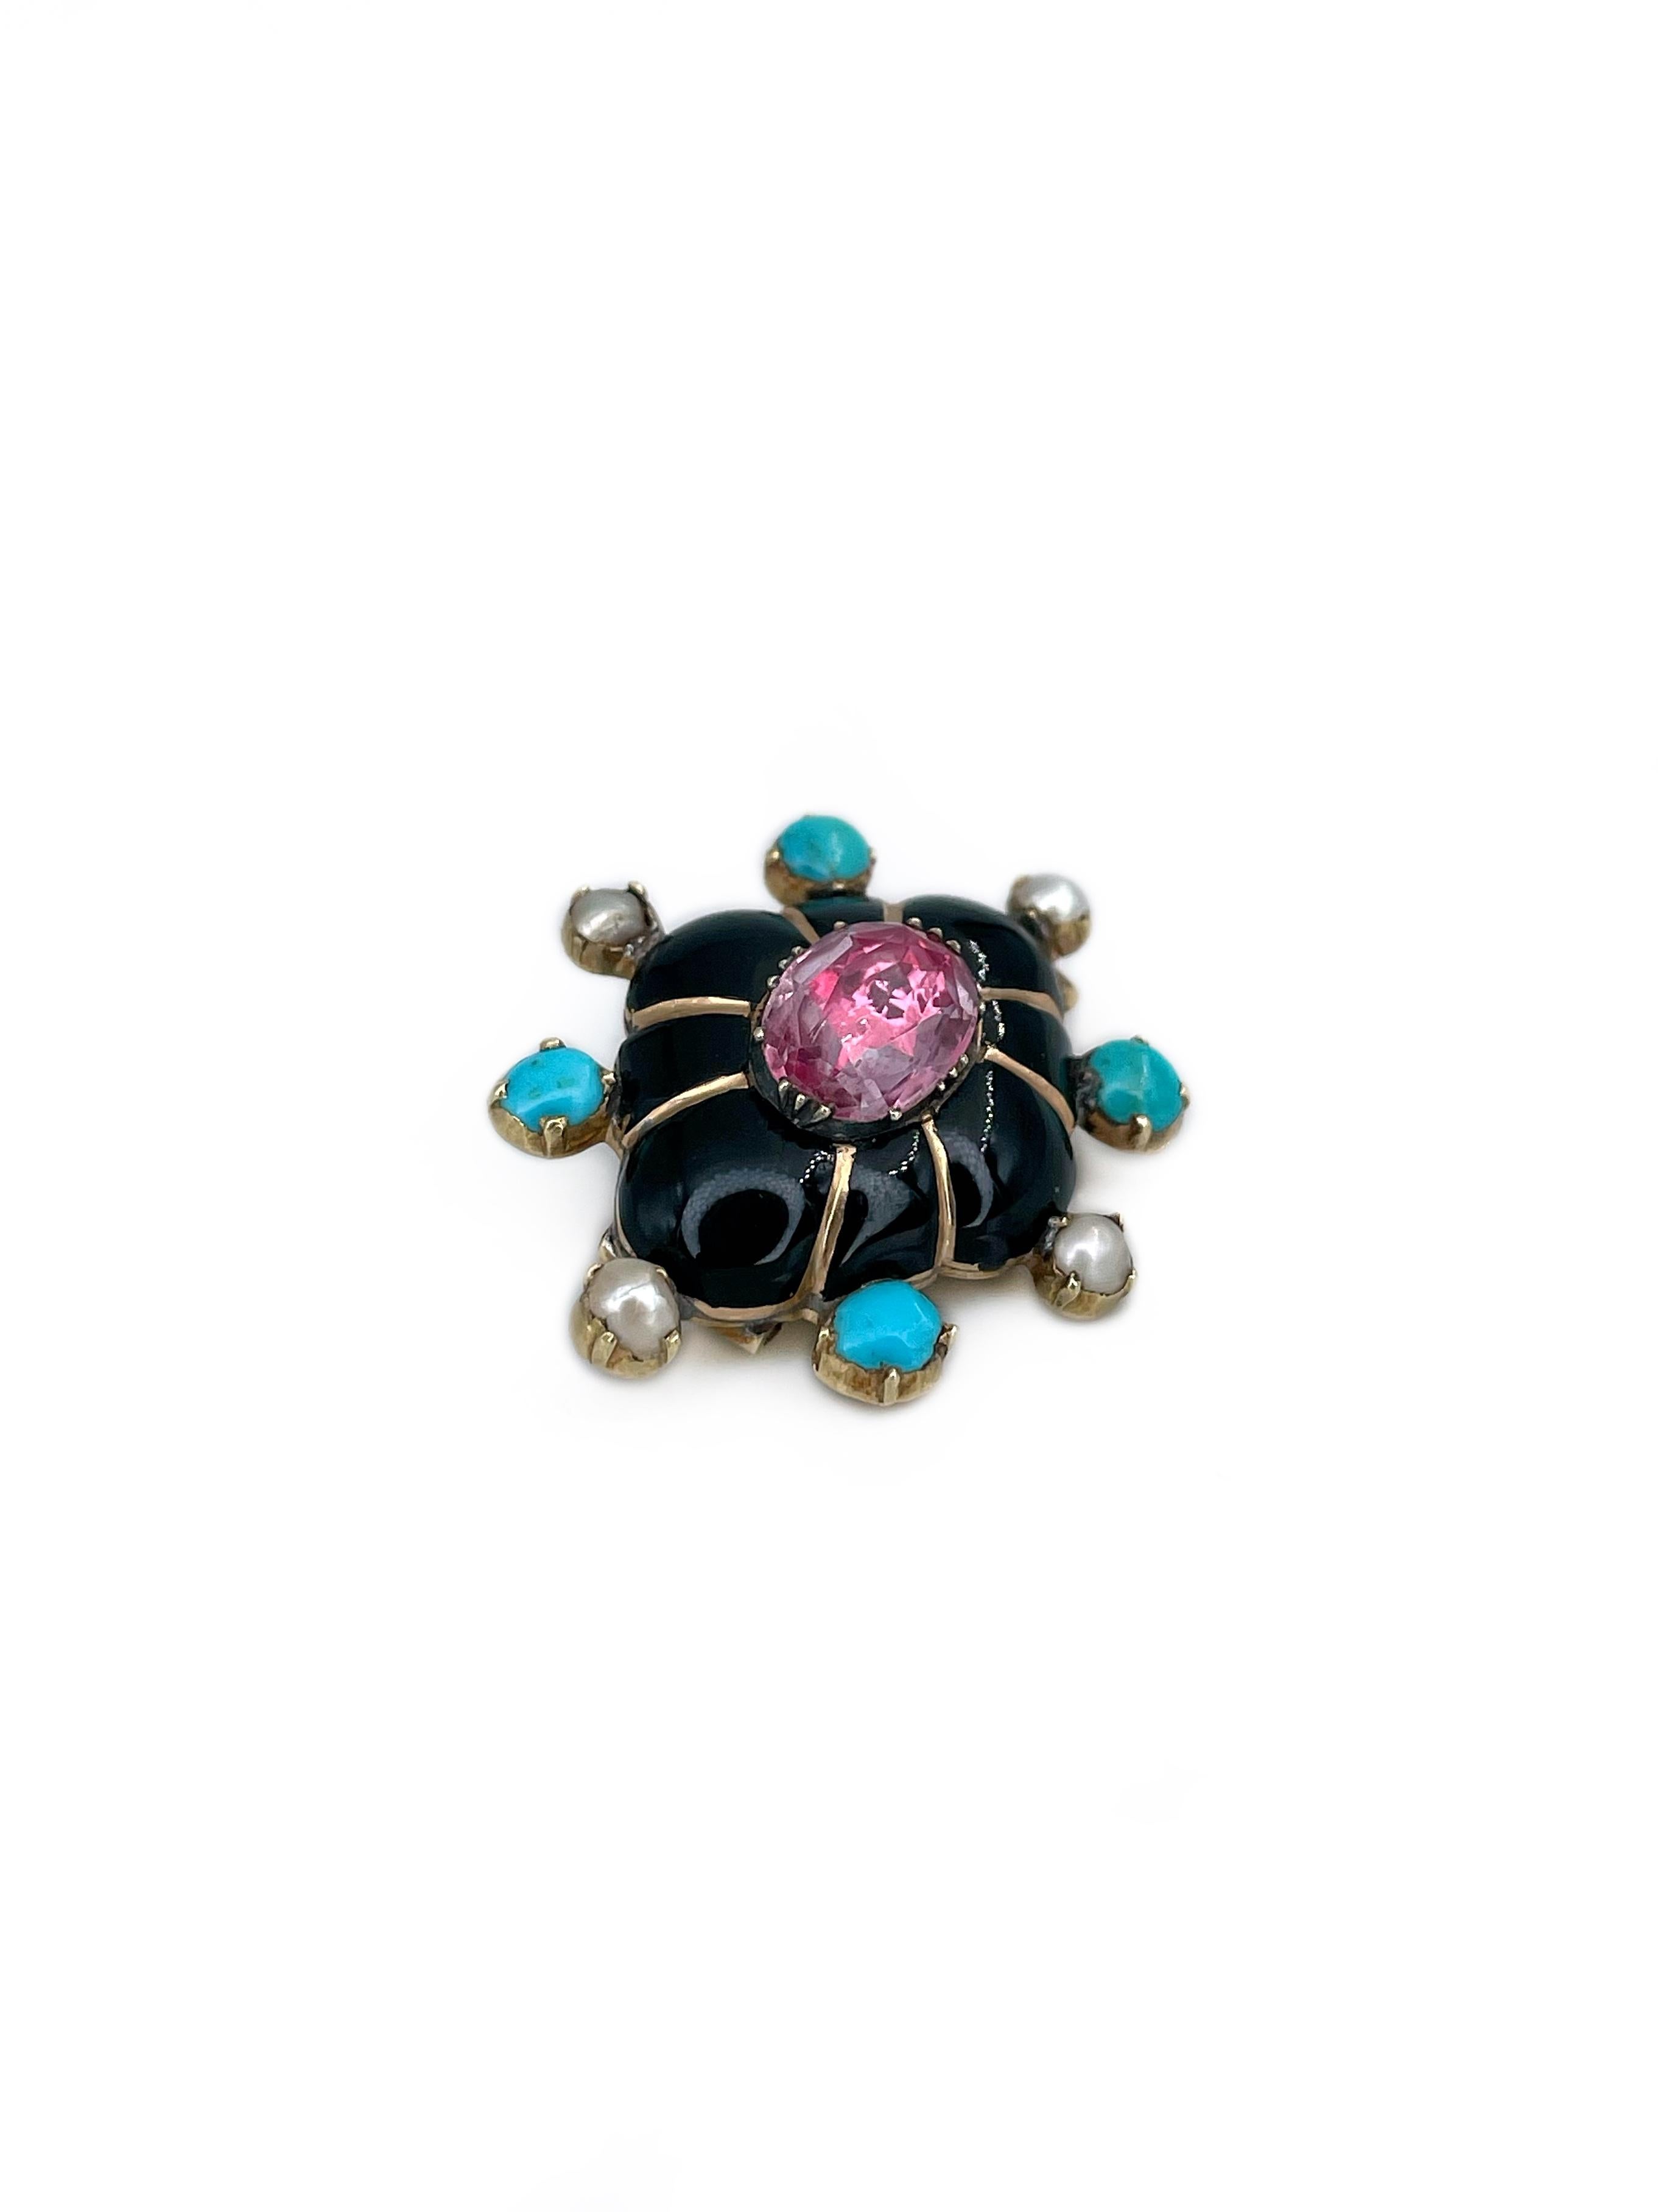 This is an amazing Victorian pin brooch crafted in 18K yellow gold. Circa 1870. 

The central stone is topaz (tested by the Assay Office). The piece is adorned with black enamel. The edges are encrusted with 4 turquoises and 4 cultured pearls. 